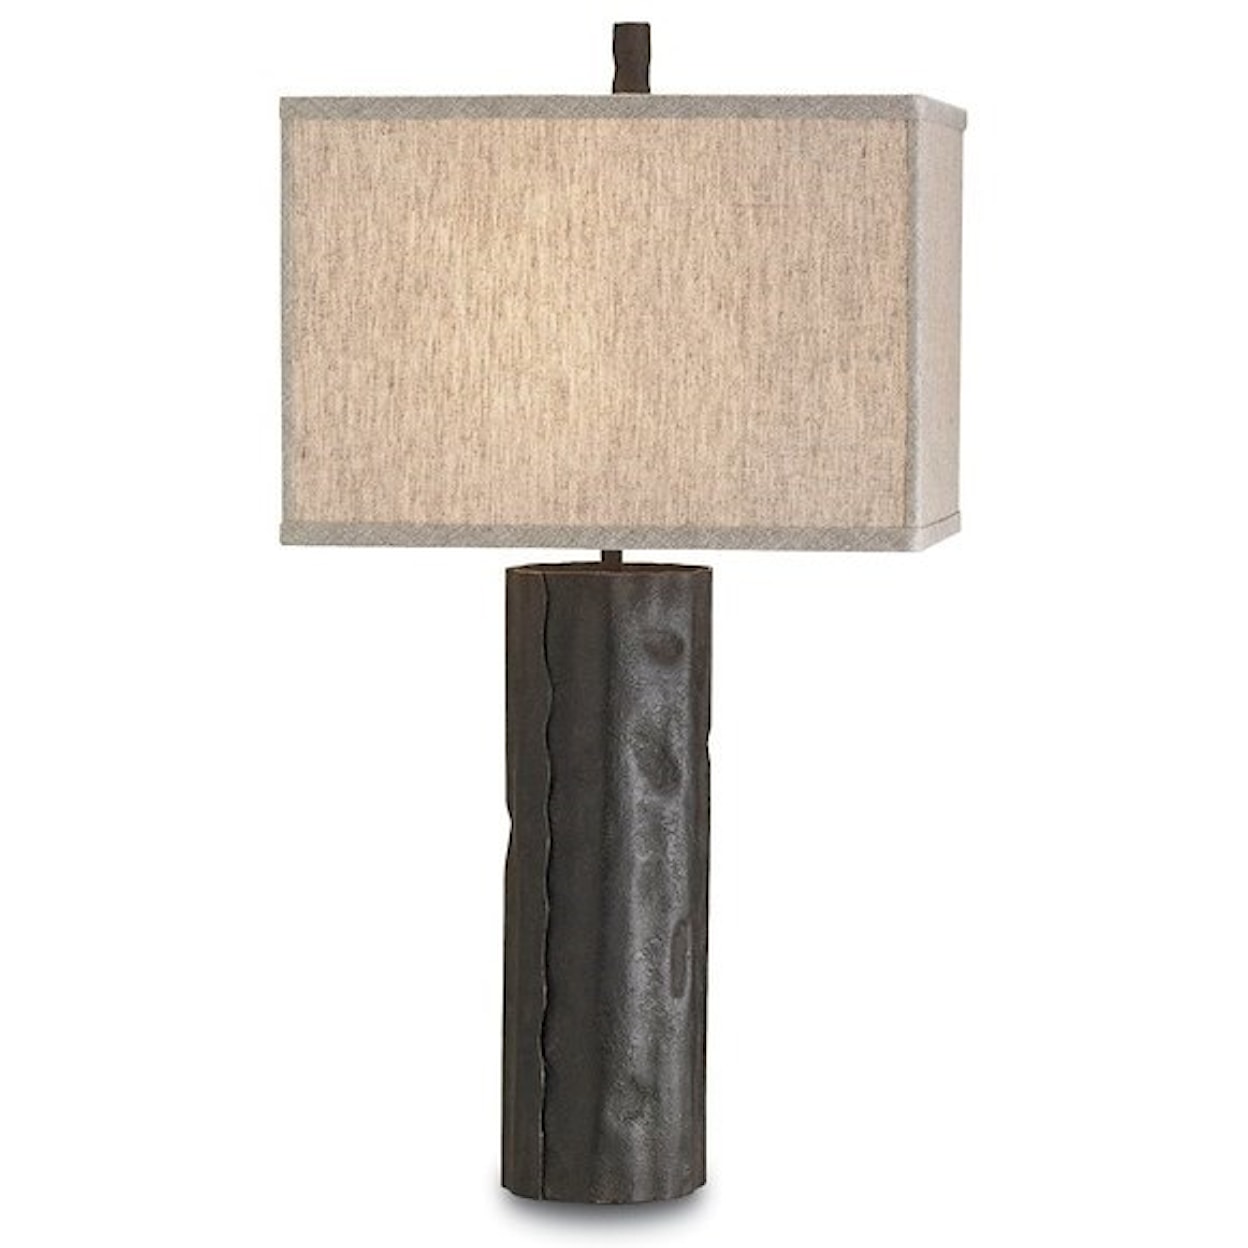 Currey & Co Lighting - Currey Table Lamp